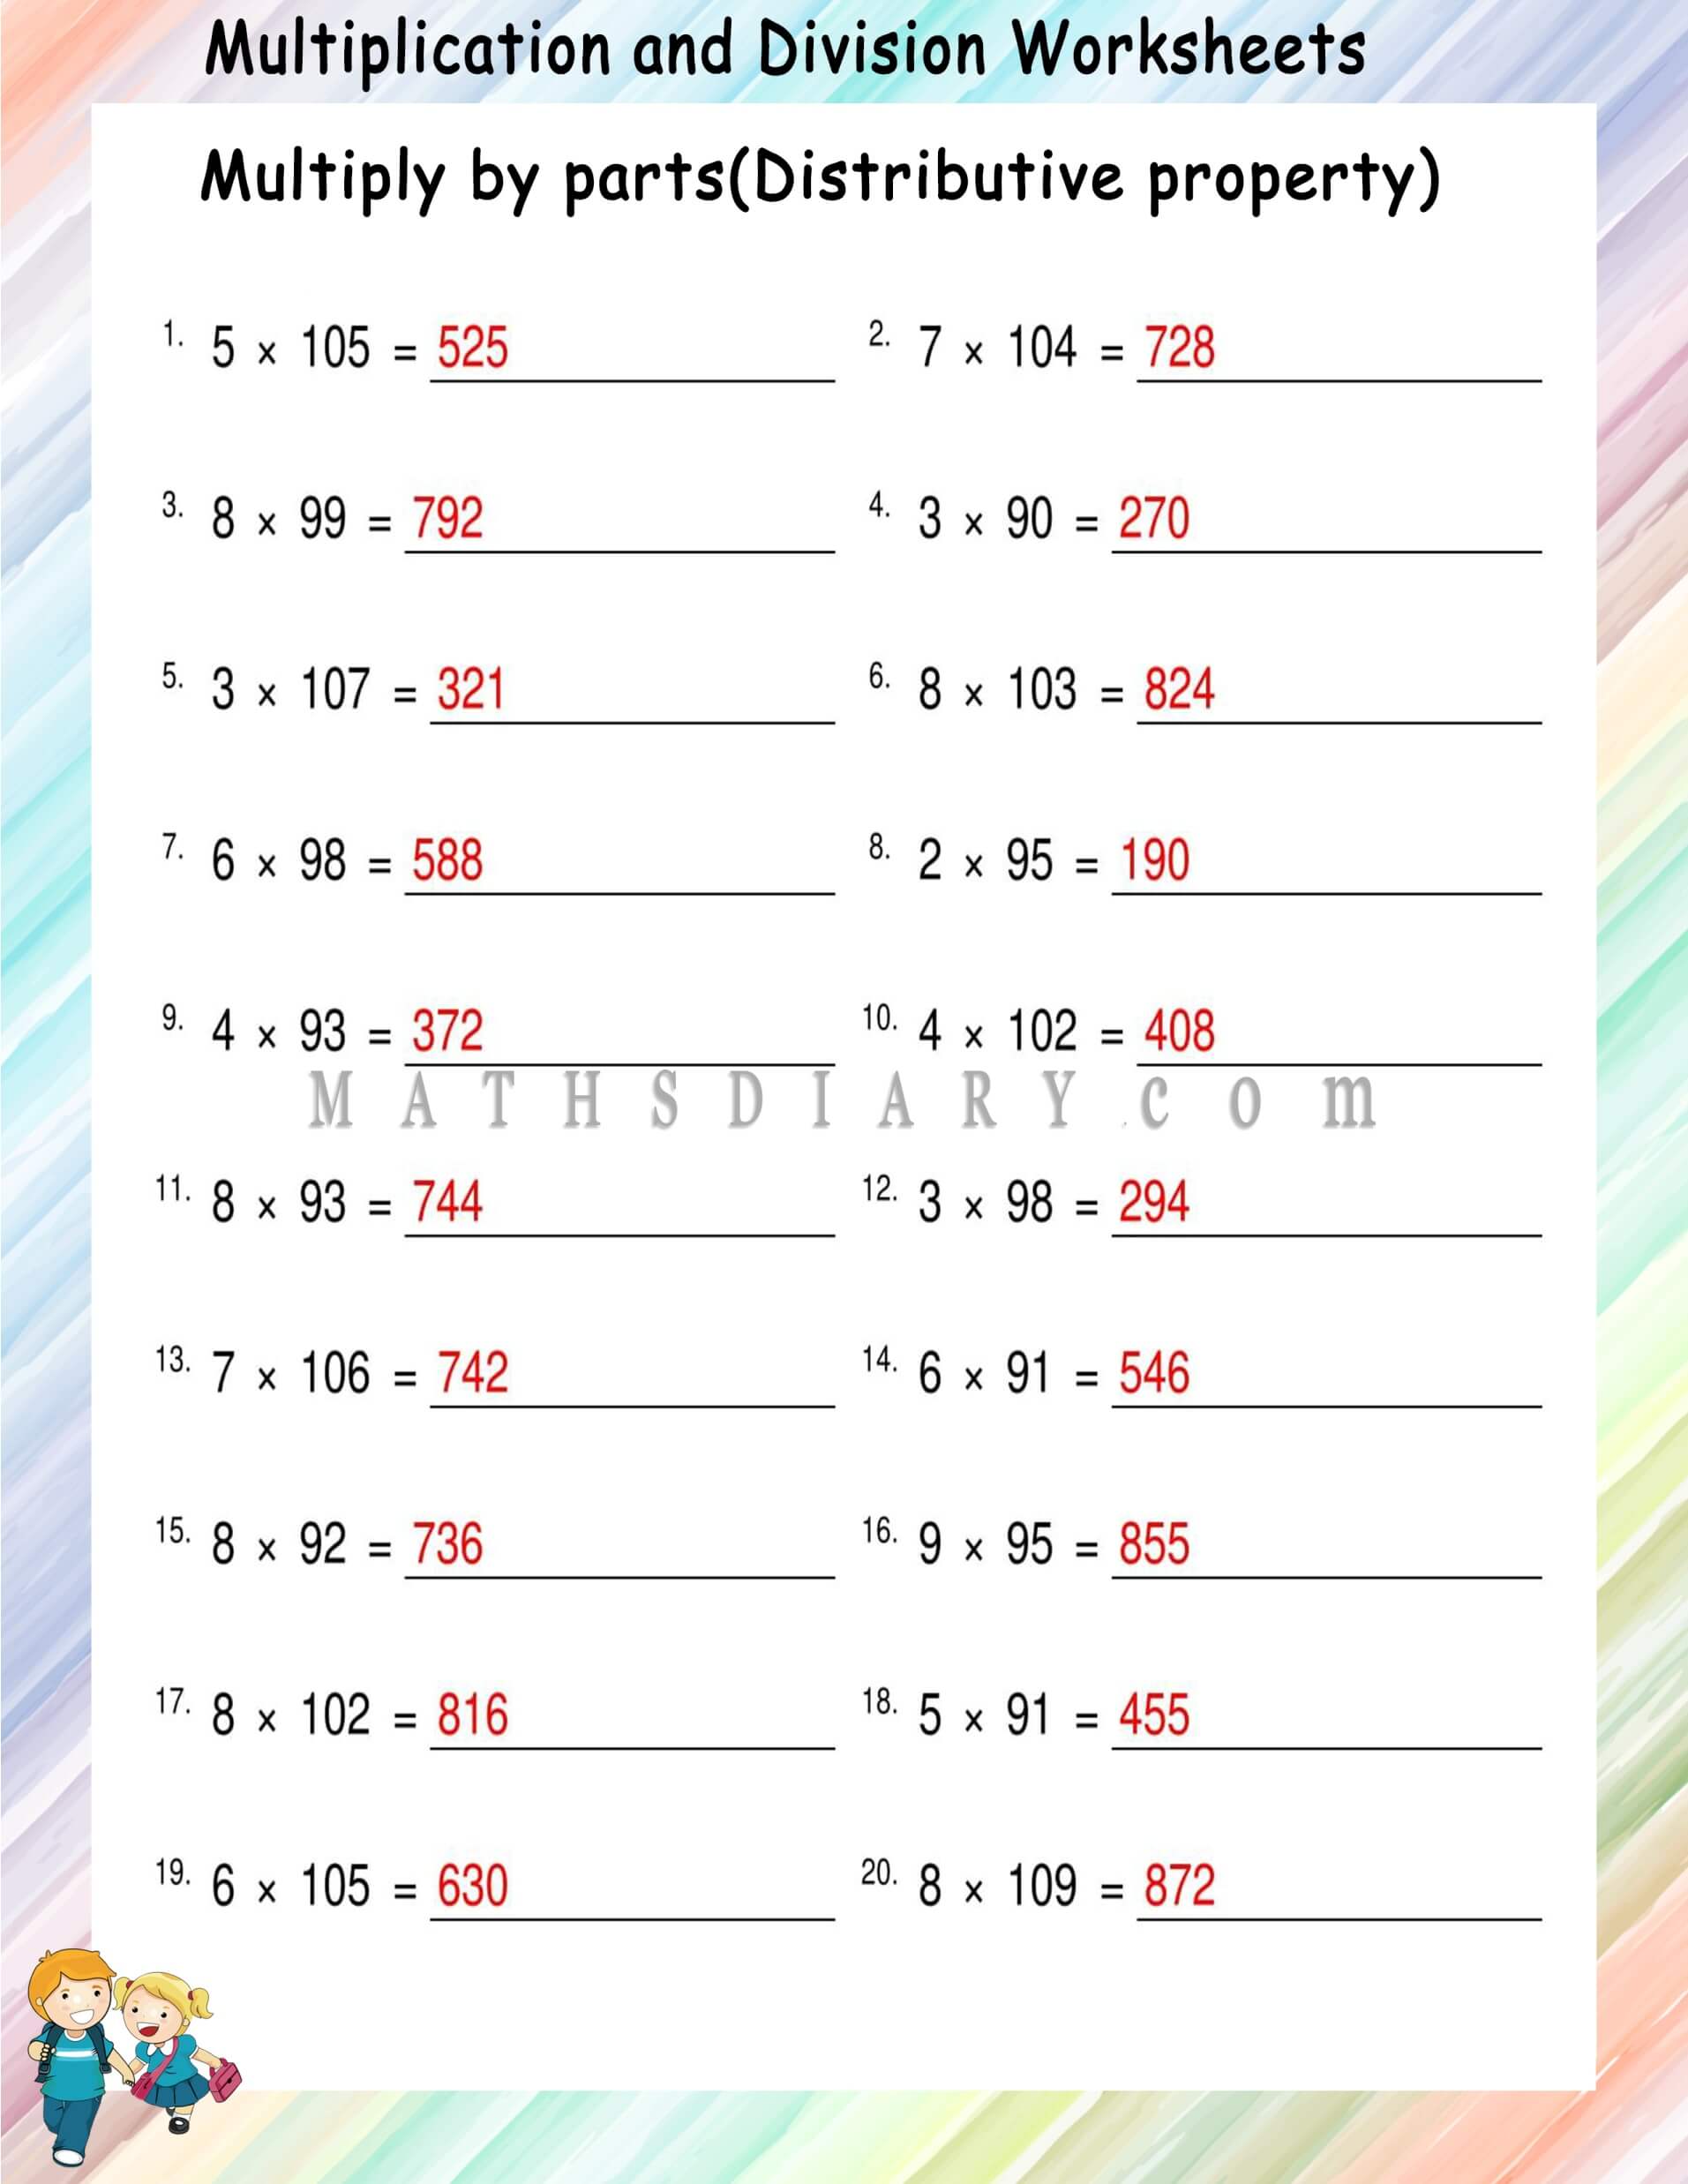 Multiplying By Parts(Distributive Property) worksheets - Math With Distributive Property Worksheet Answers